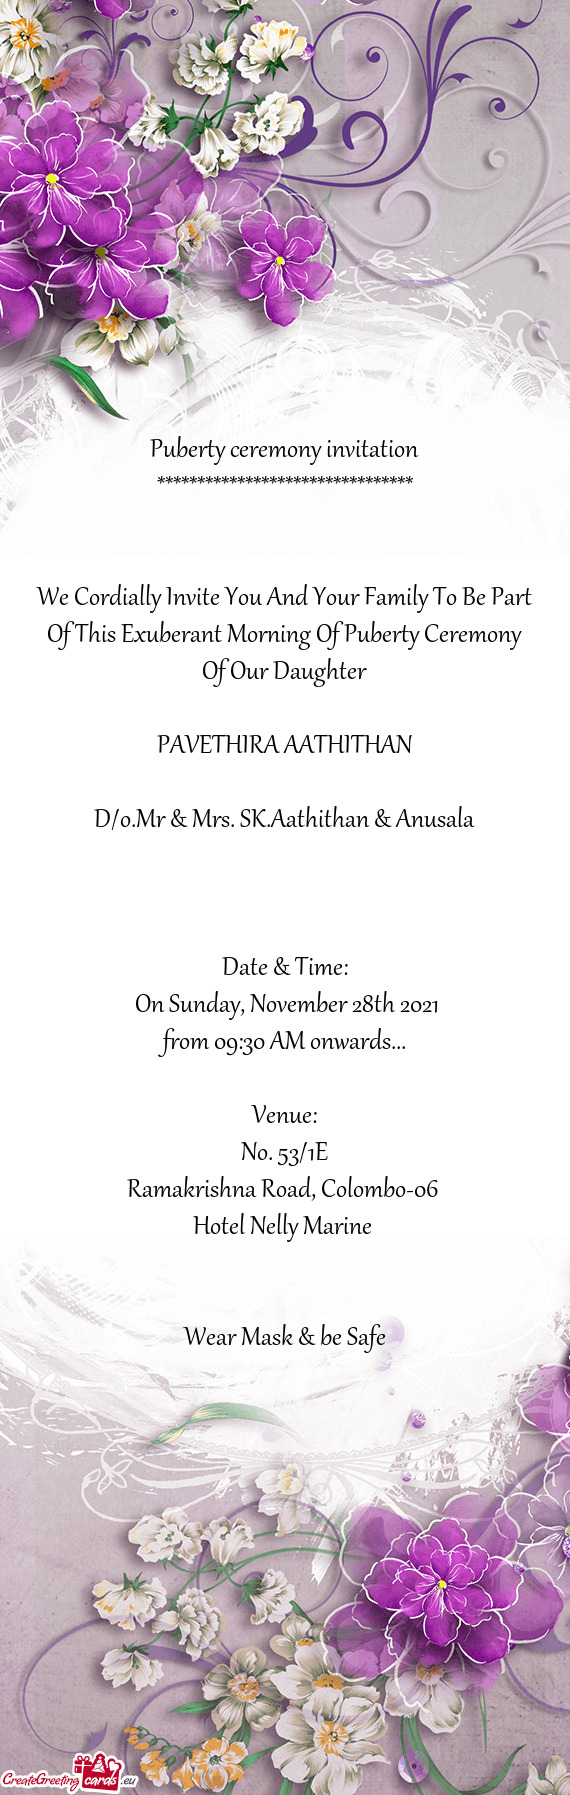 We Cordially Invite You And Your Family To Be Part Of This Exuberant Morning Of Puberty Ceremony Of